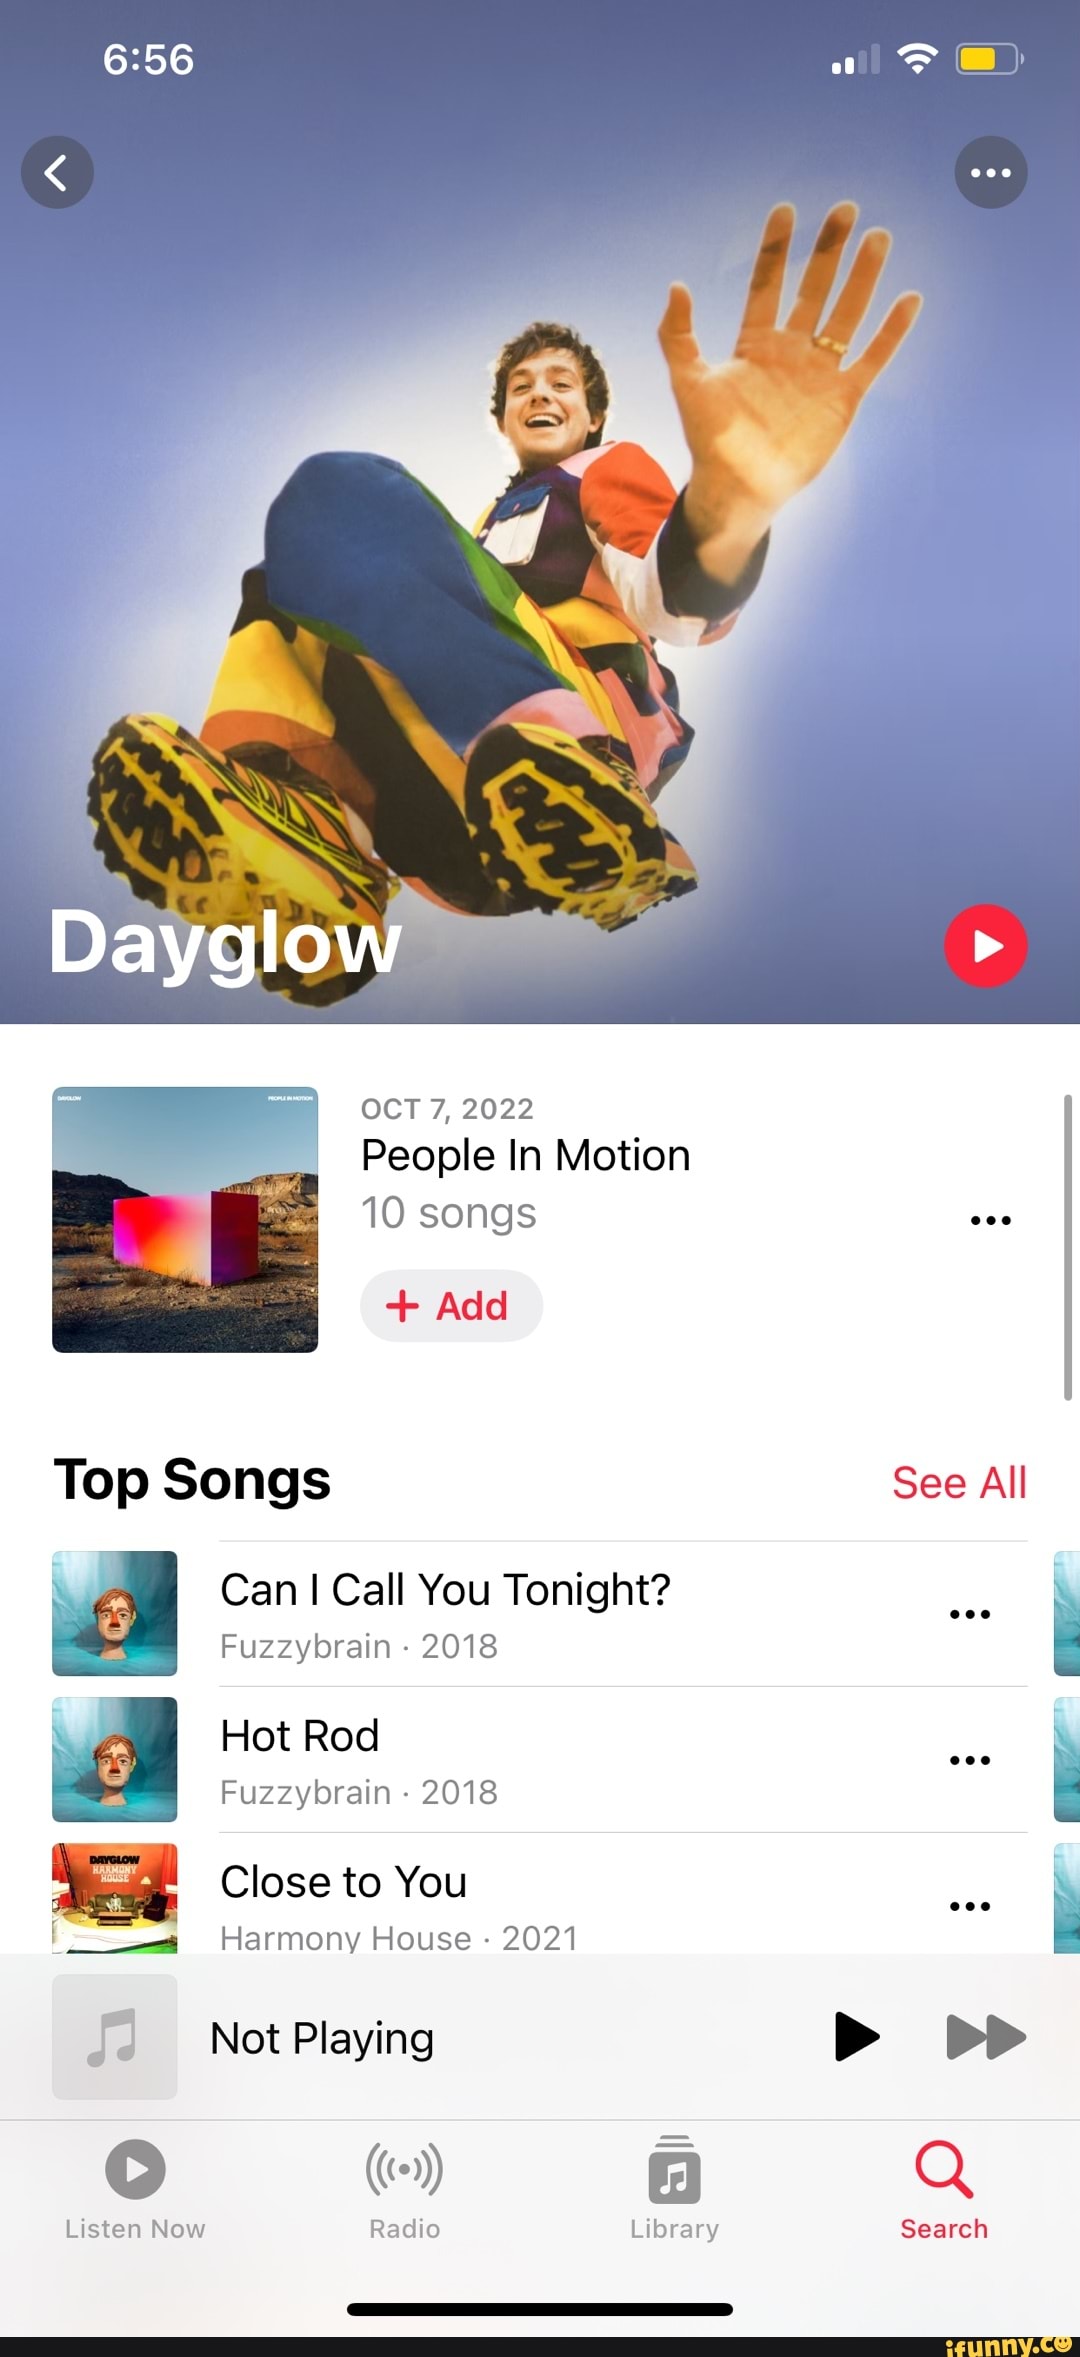 Dayglow: Can I Call You Tonight? (2018)